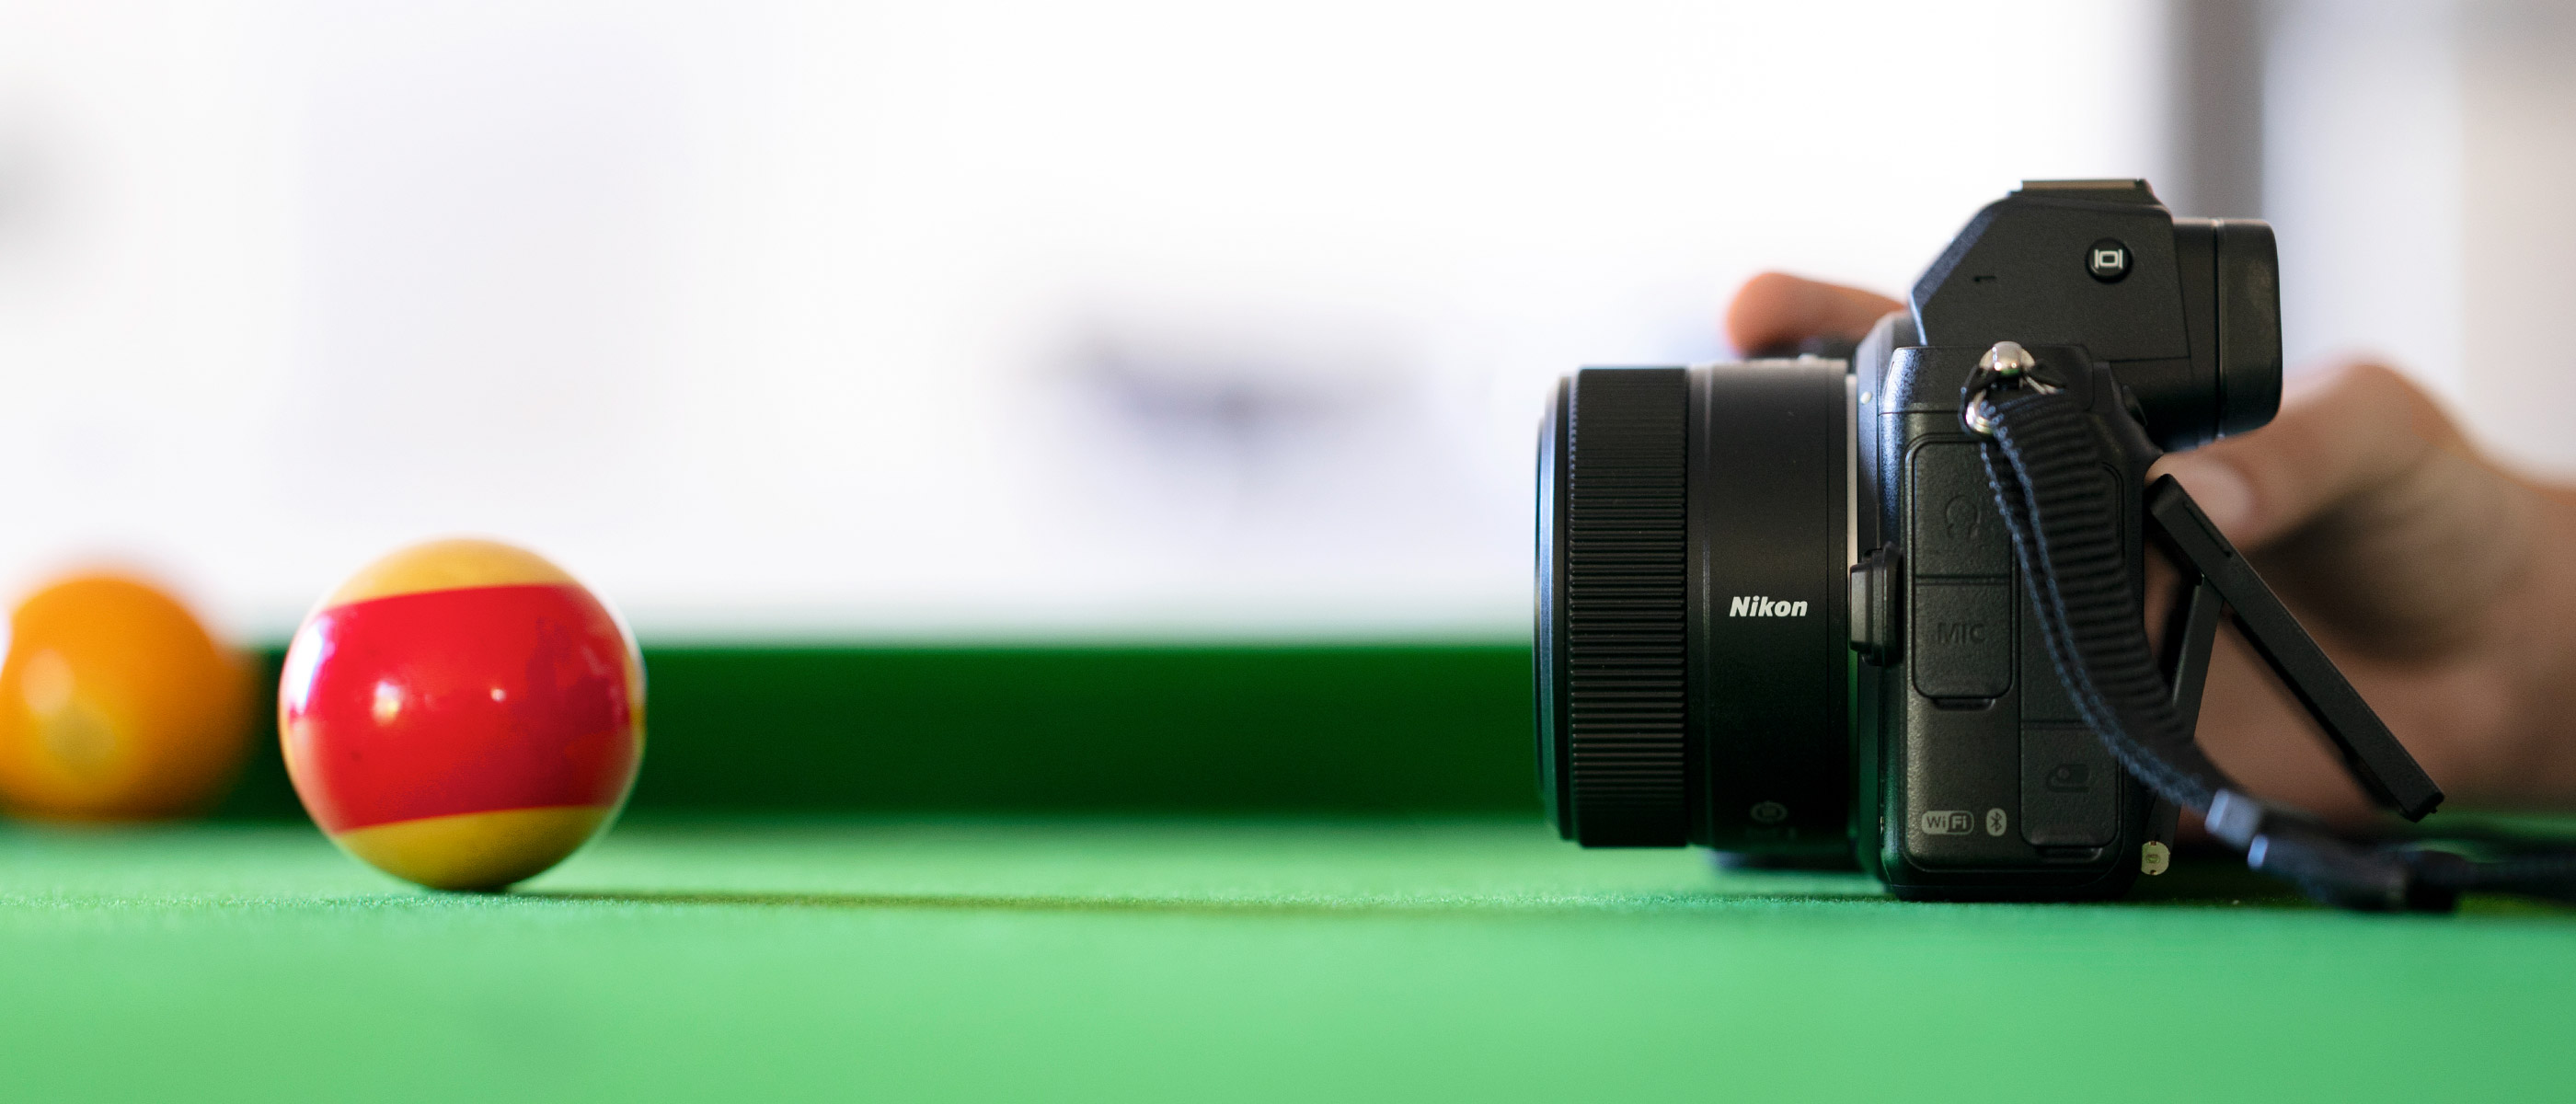 Photo of a Nikon Z camera with NIKKOR Z 28mm f/2.8 lens on a pool table